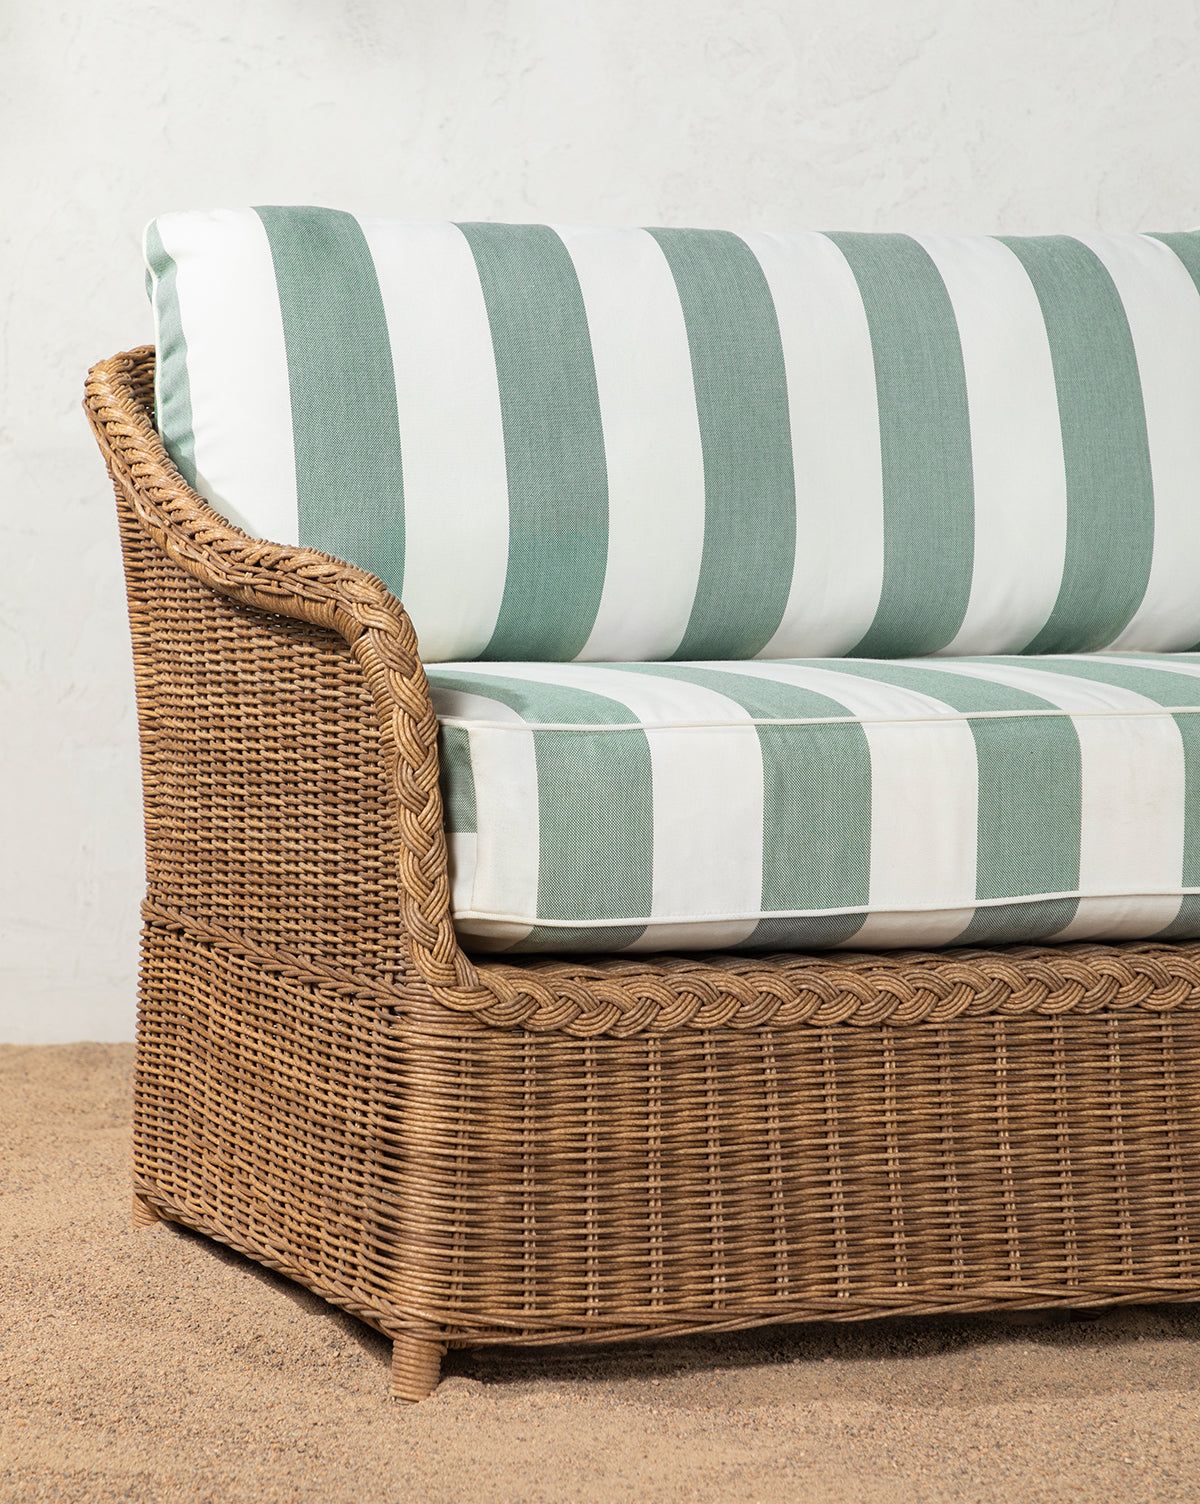 The Beauty of Outdoor Wicker Furniture:
Tips for Choosing the Perfect Piece